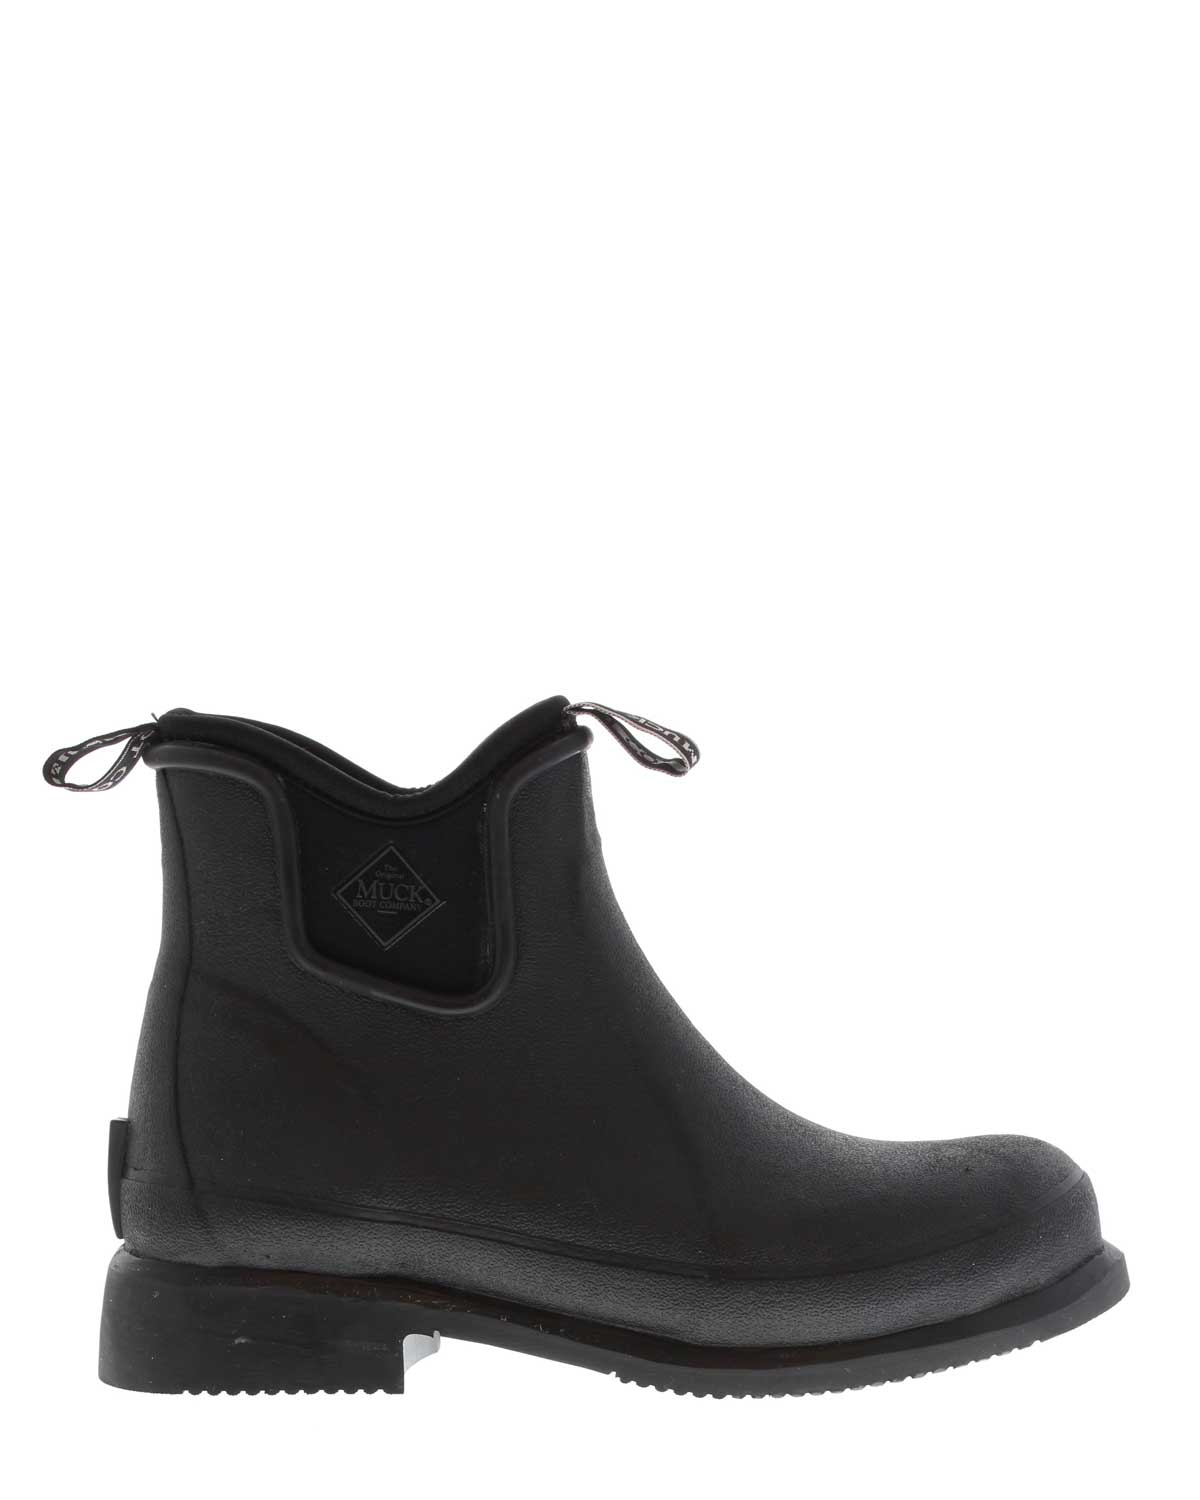 black ankle gumboots